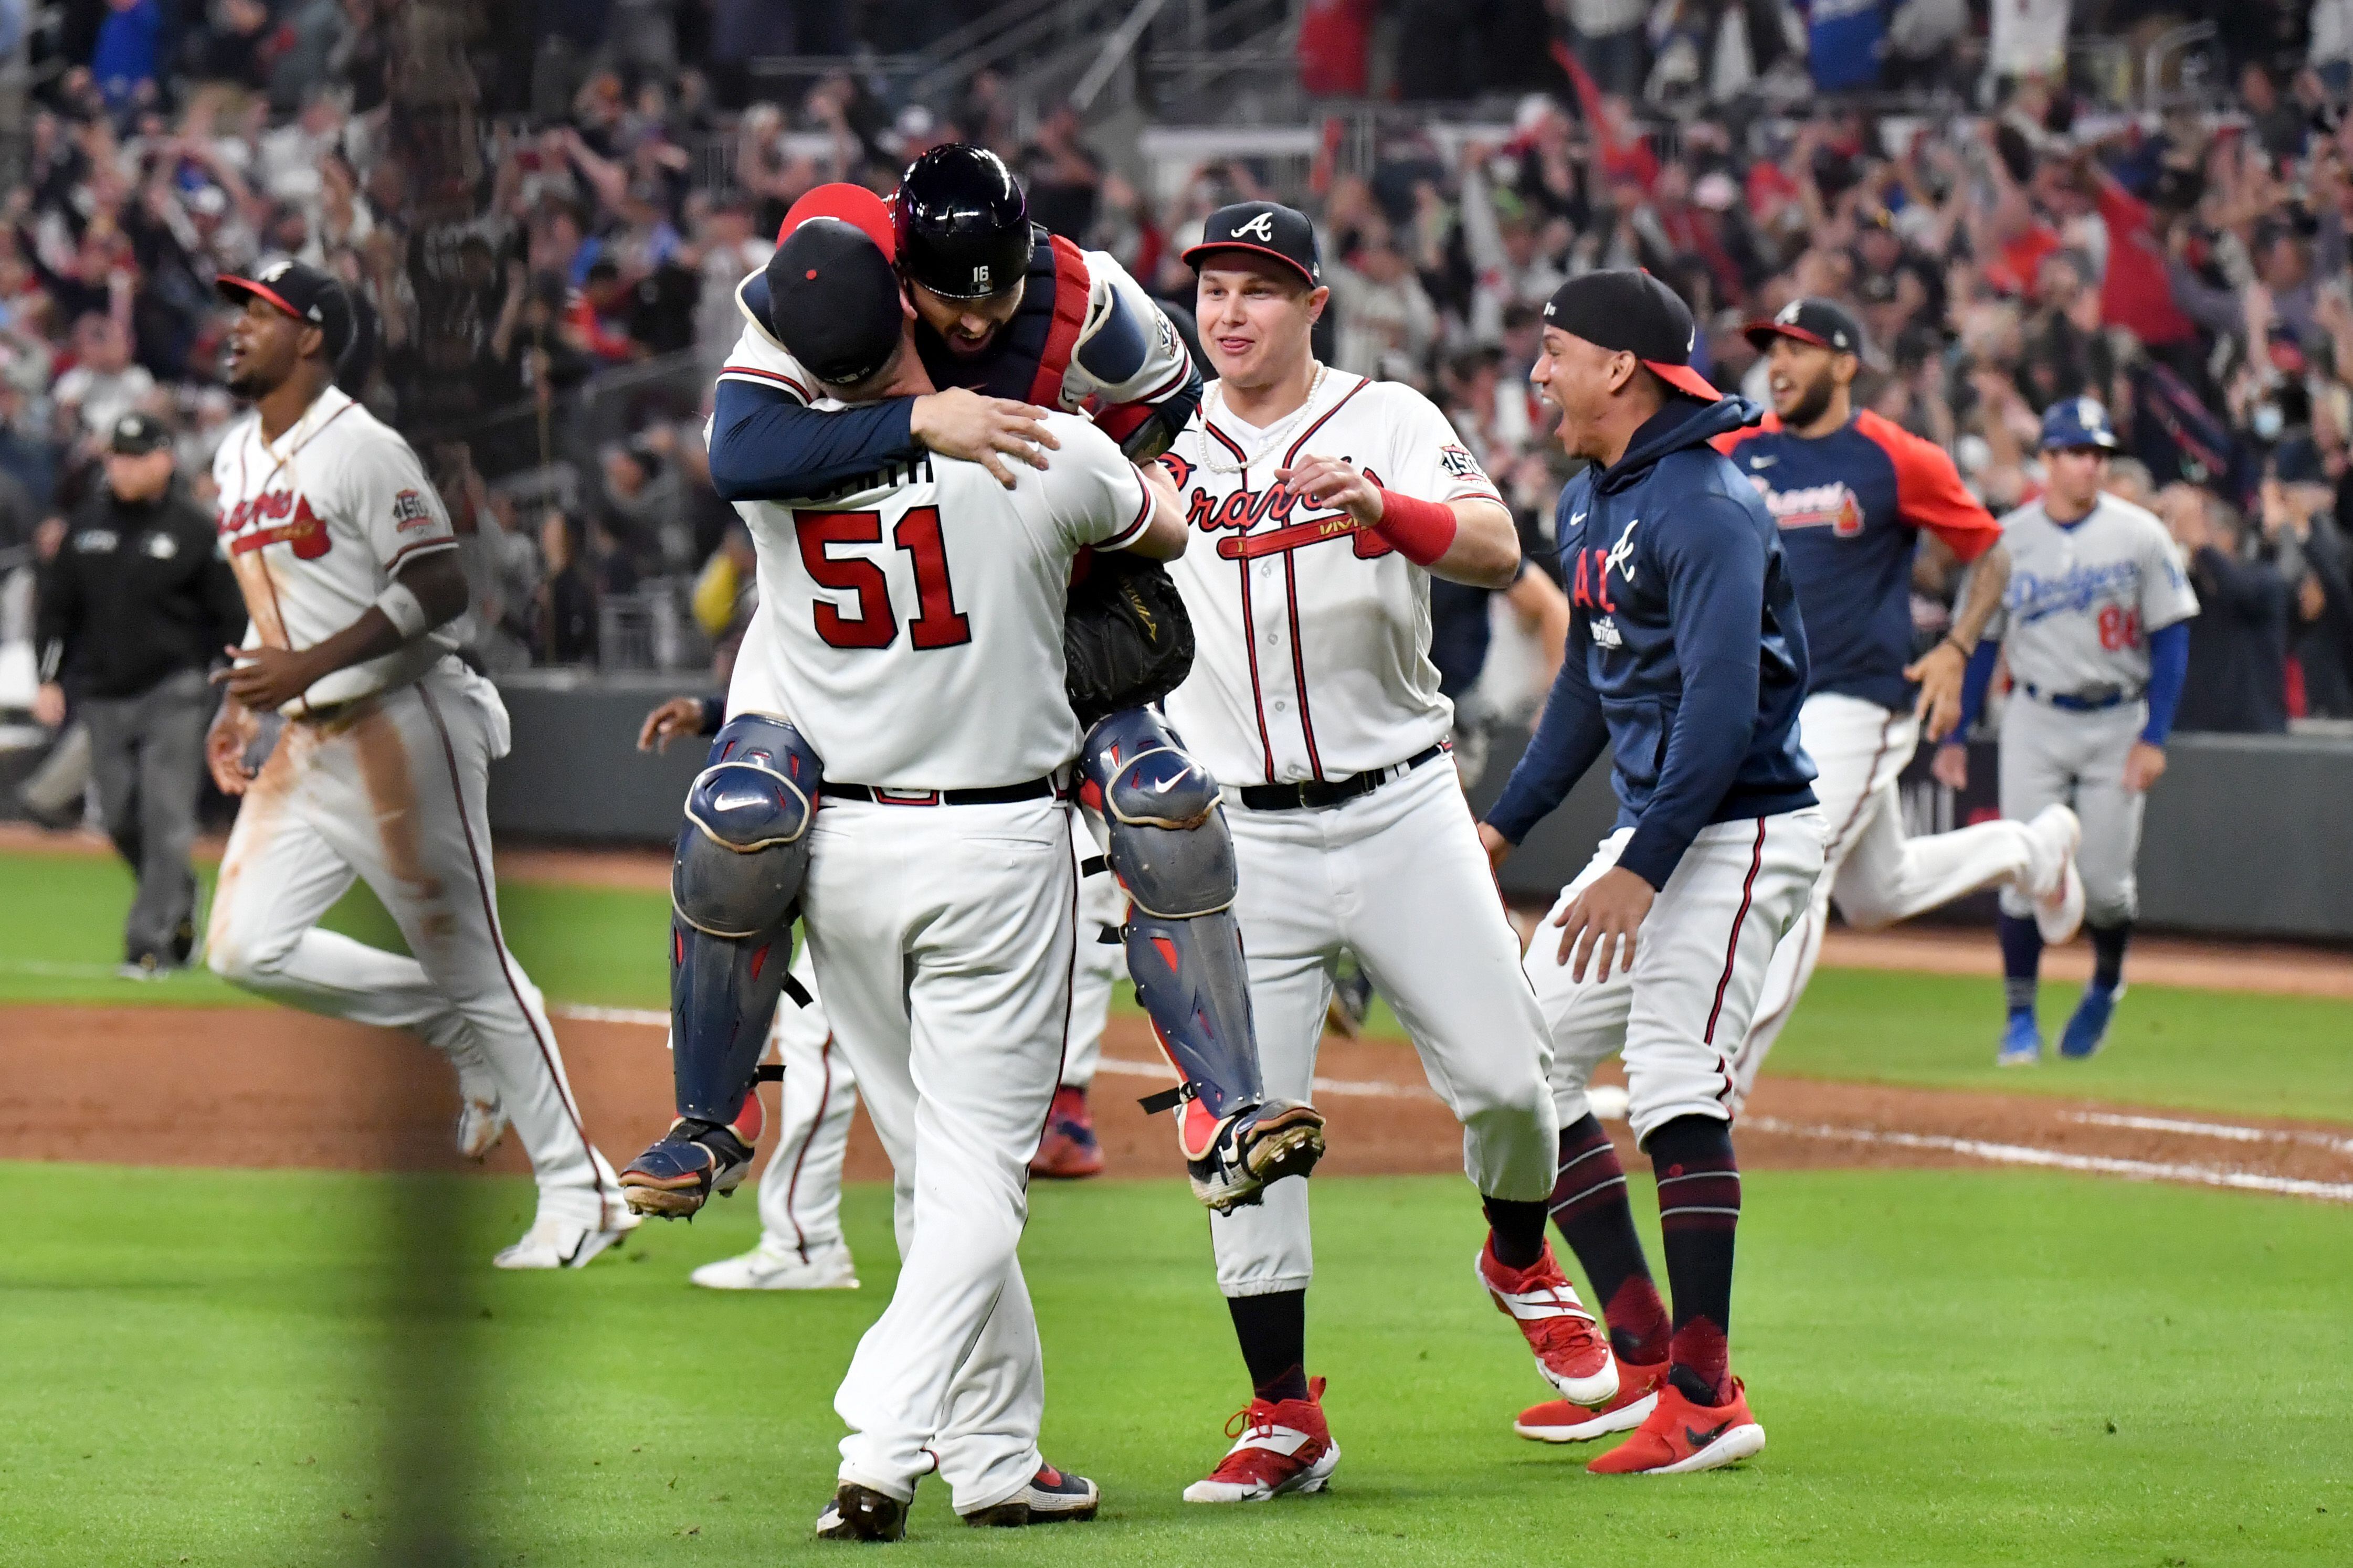 Bradley's Buzz: Asking for a friend - should the Braves try to win a bit  less?